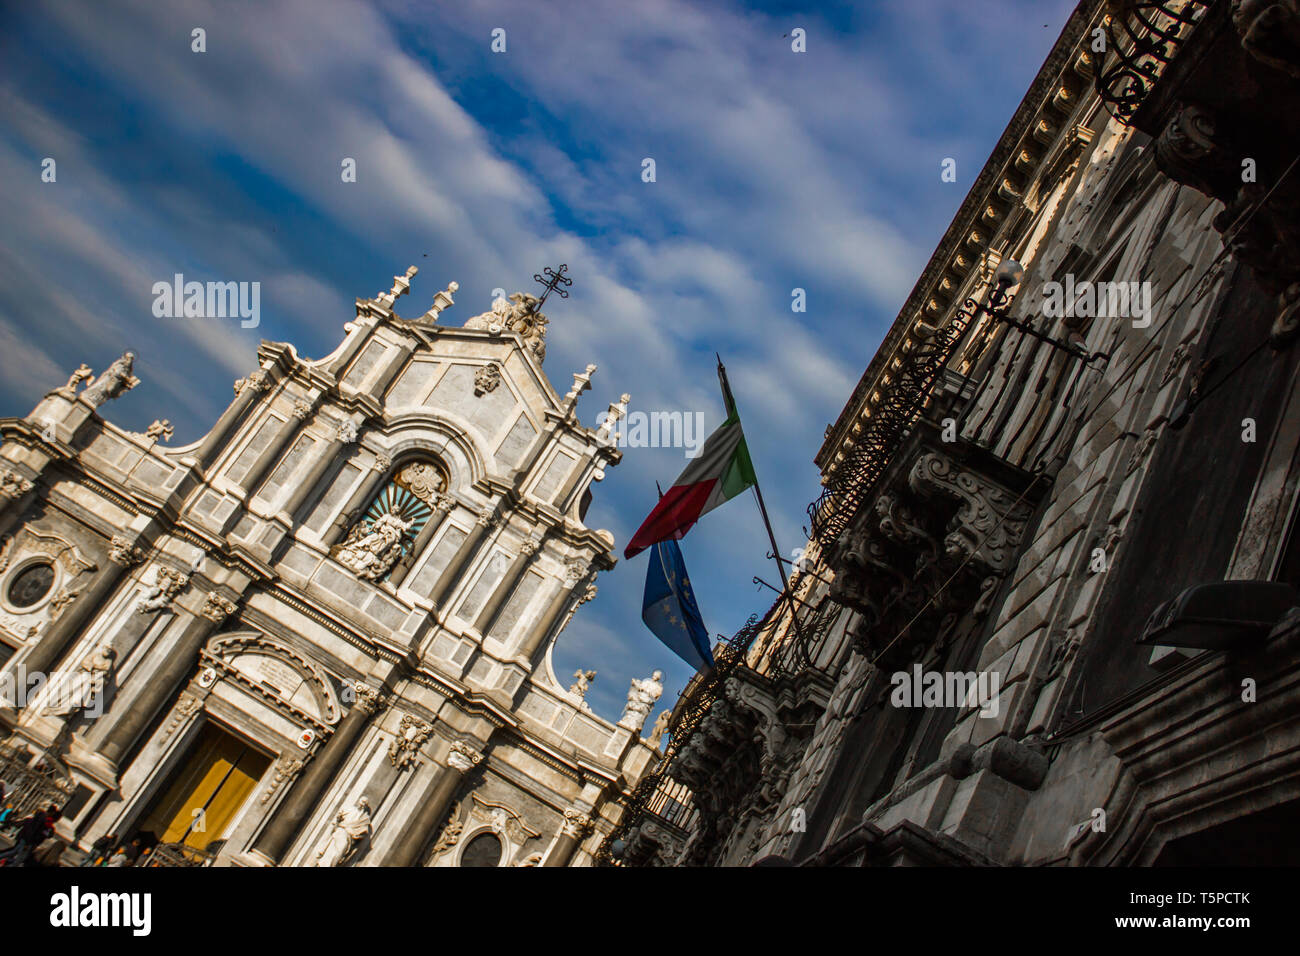 Catania cathedral front view with baroque architecture building, style cut shot Stock Photo